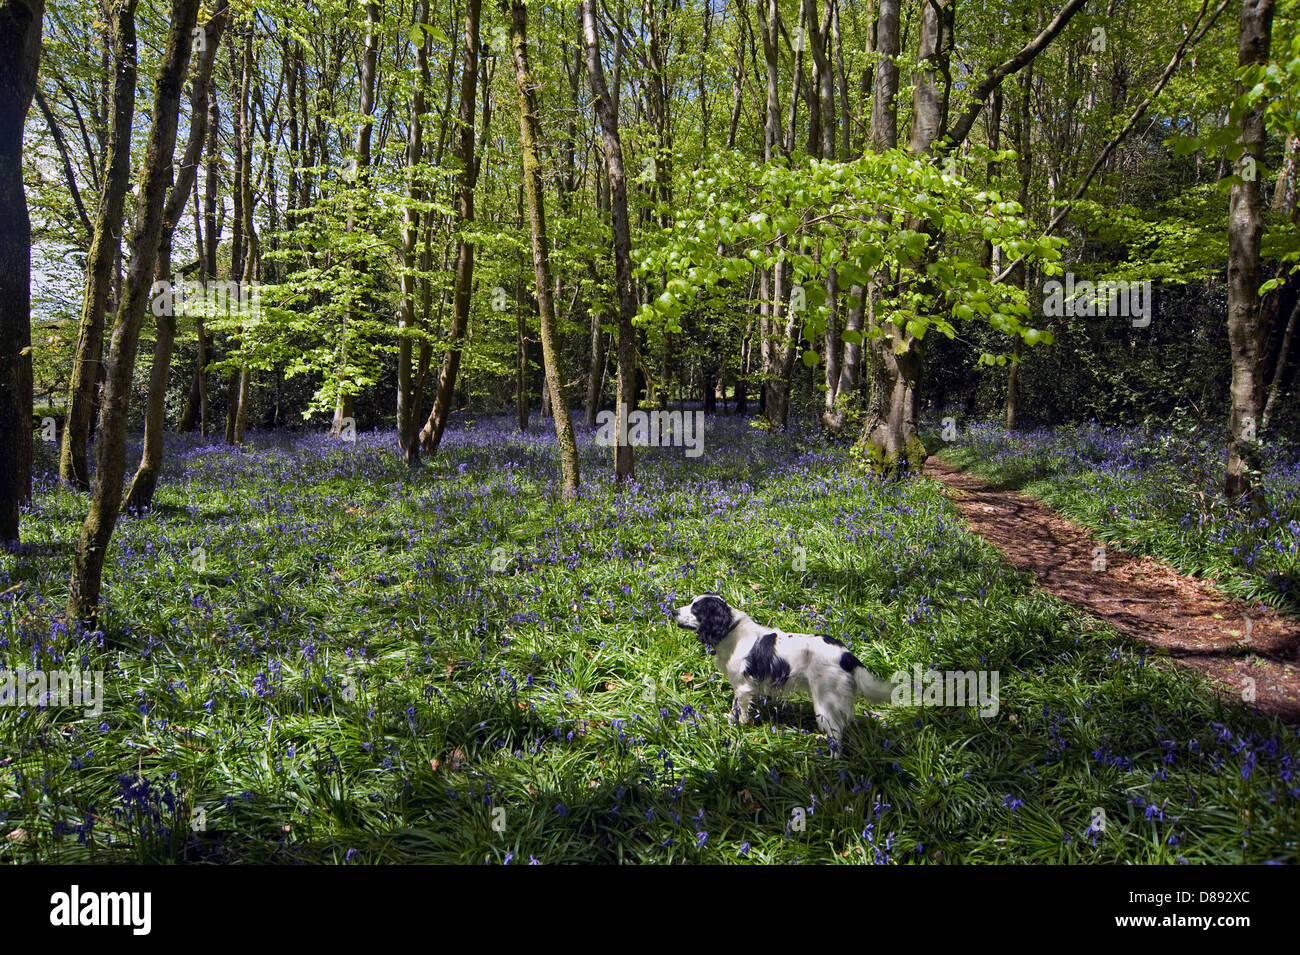 bluebells flowering at Blackbury Camp, a Devon Iron-age fort, with beech and oak trees in young leaf on a bright spring day Stock Photo